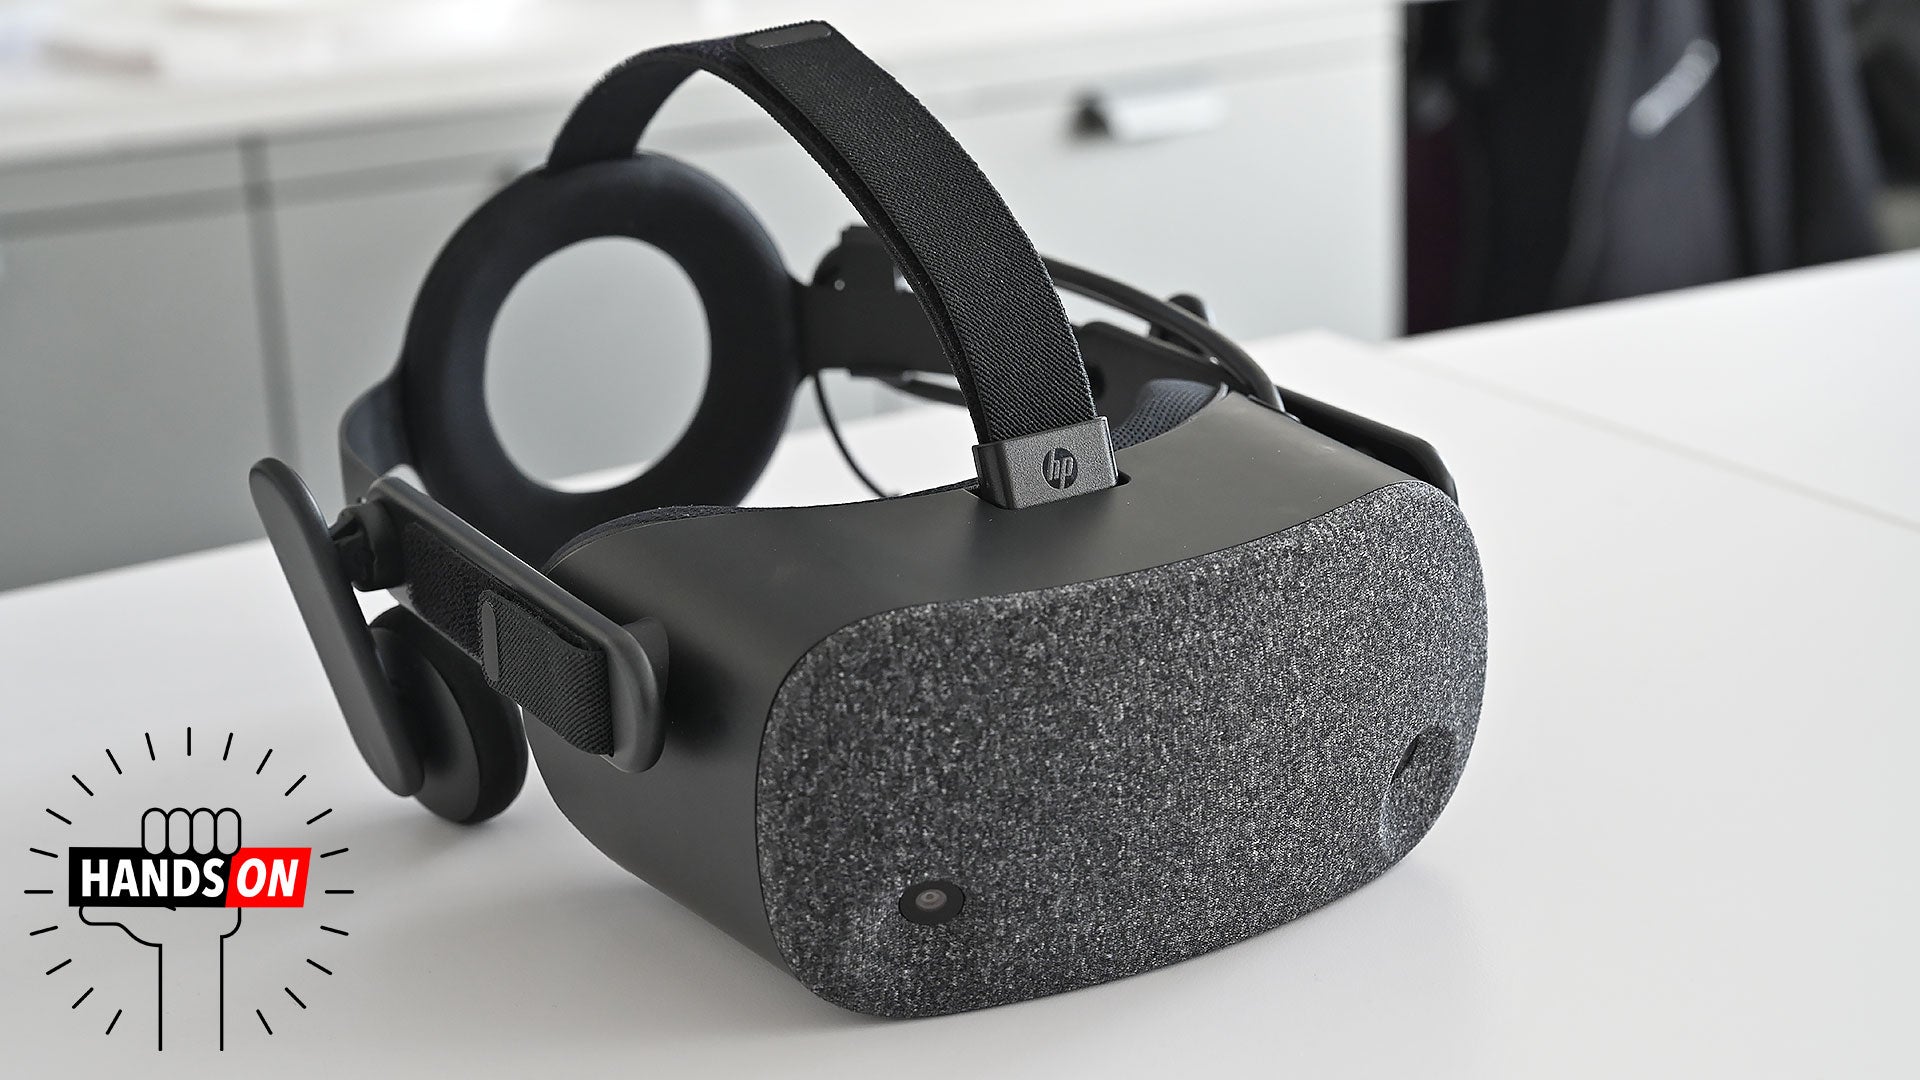 HP’s Reverb Headset Brings Us Closer To Crystal Clear VR